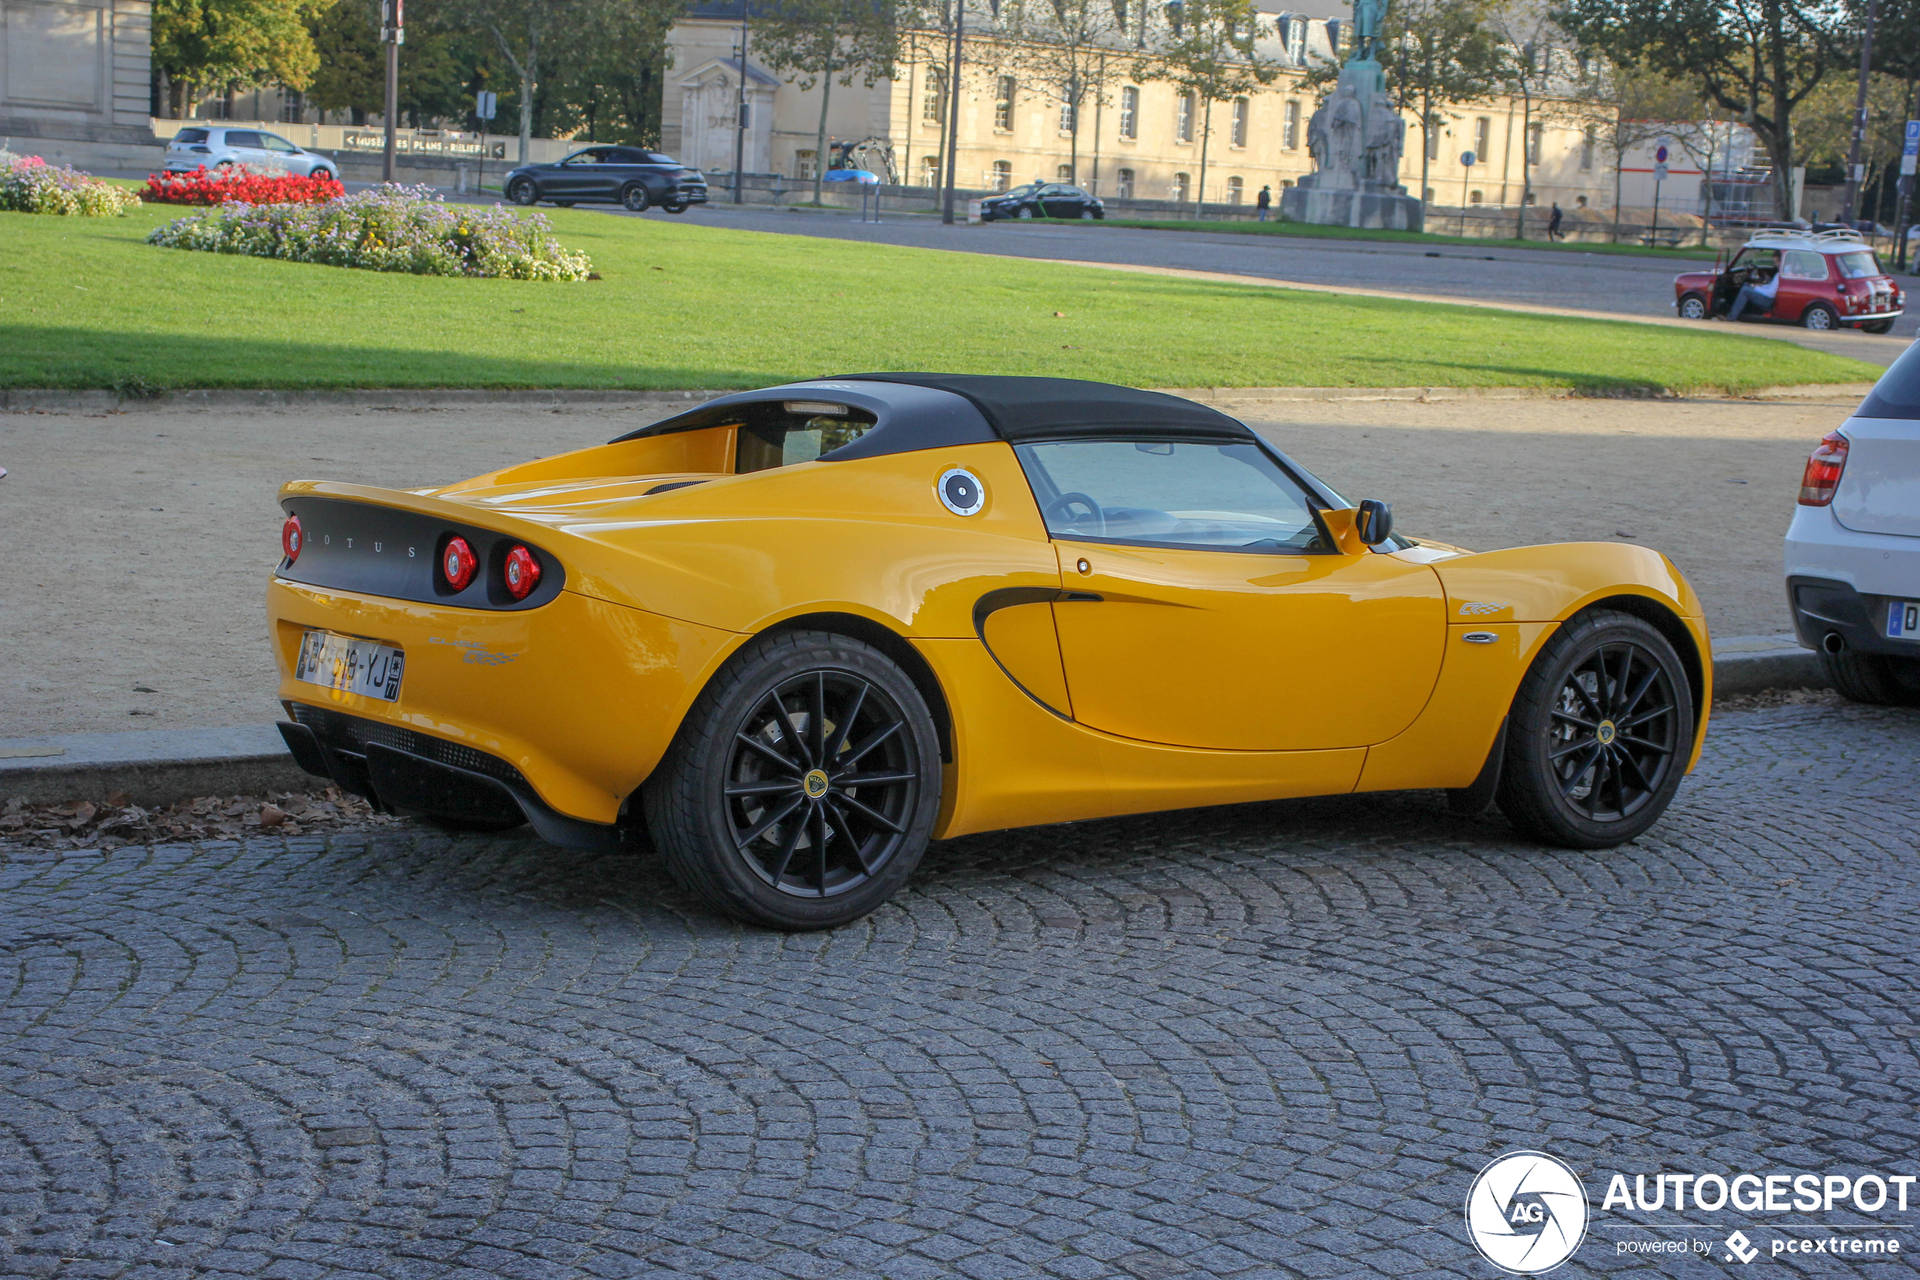 Fancy Yellow Lotus Car On The Streets Wallpaper